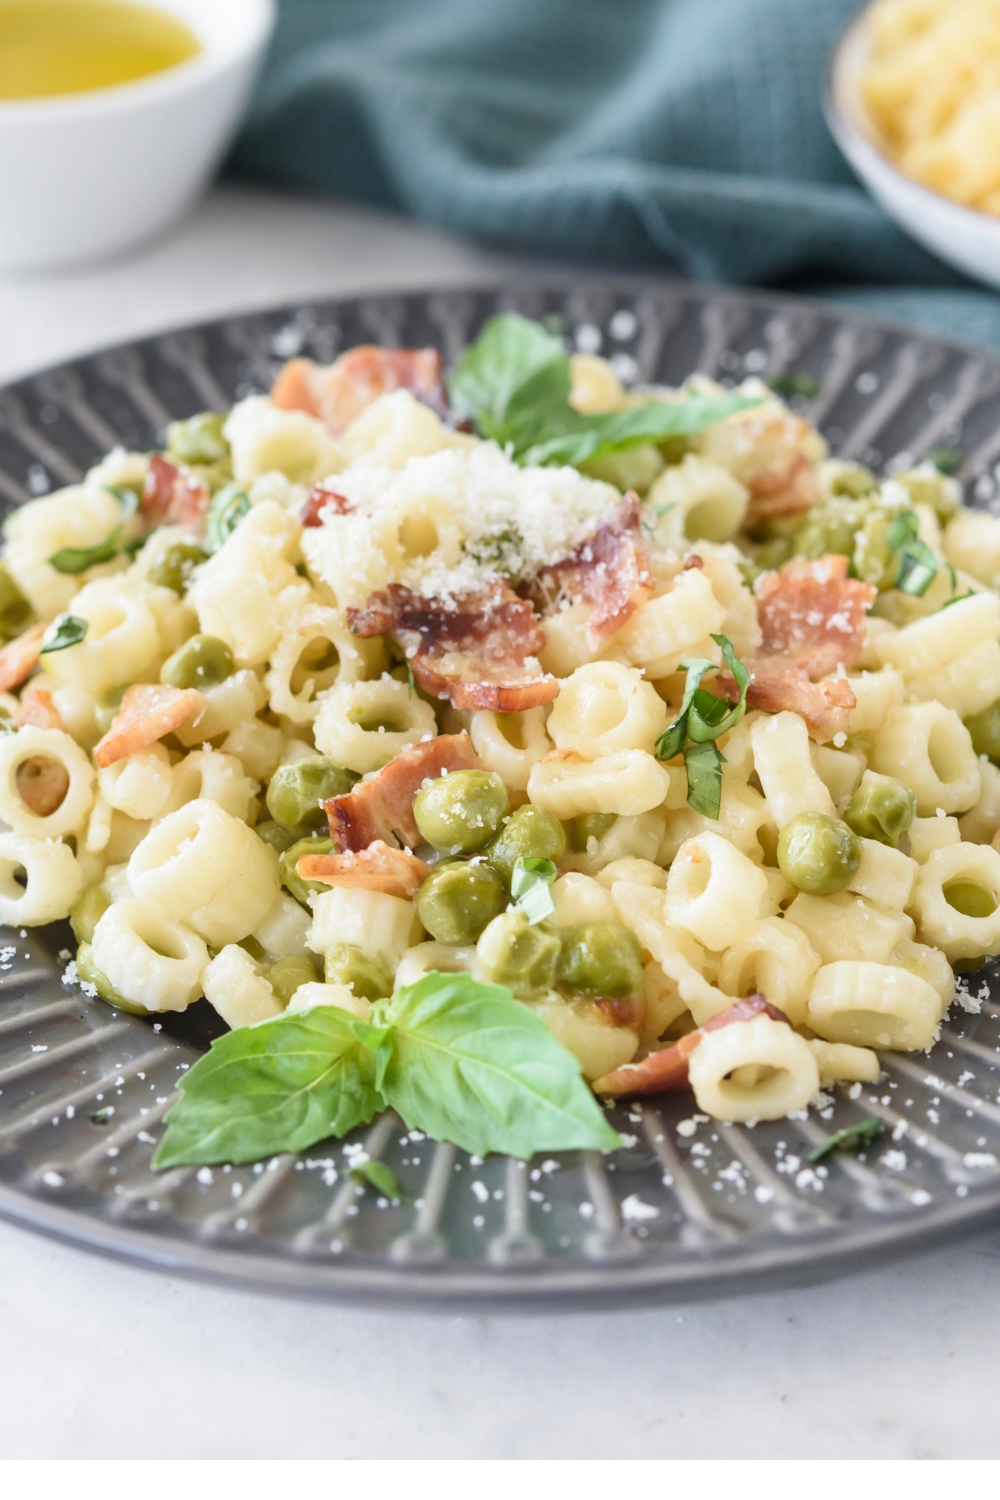 cooked pasta with peas and bacon served on a black plate with basil leaves garnish